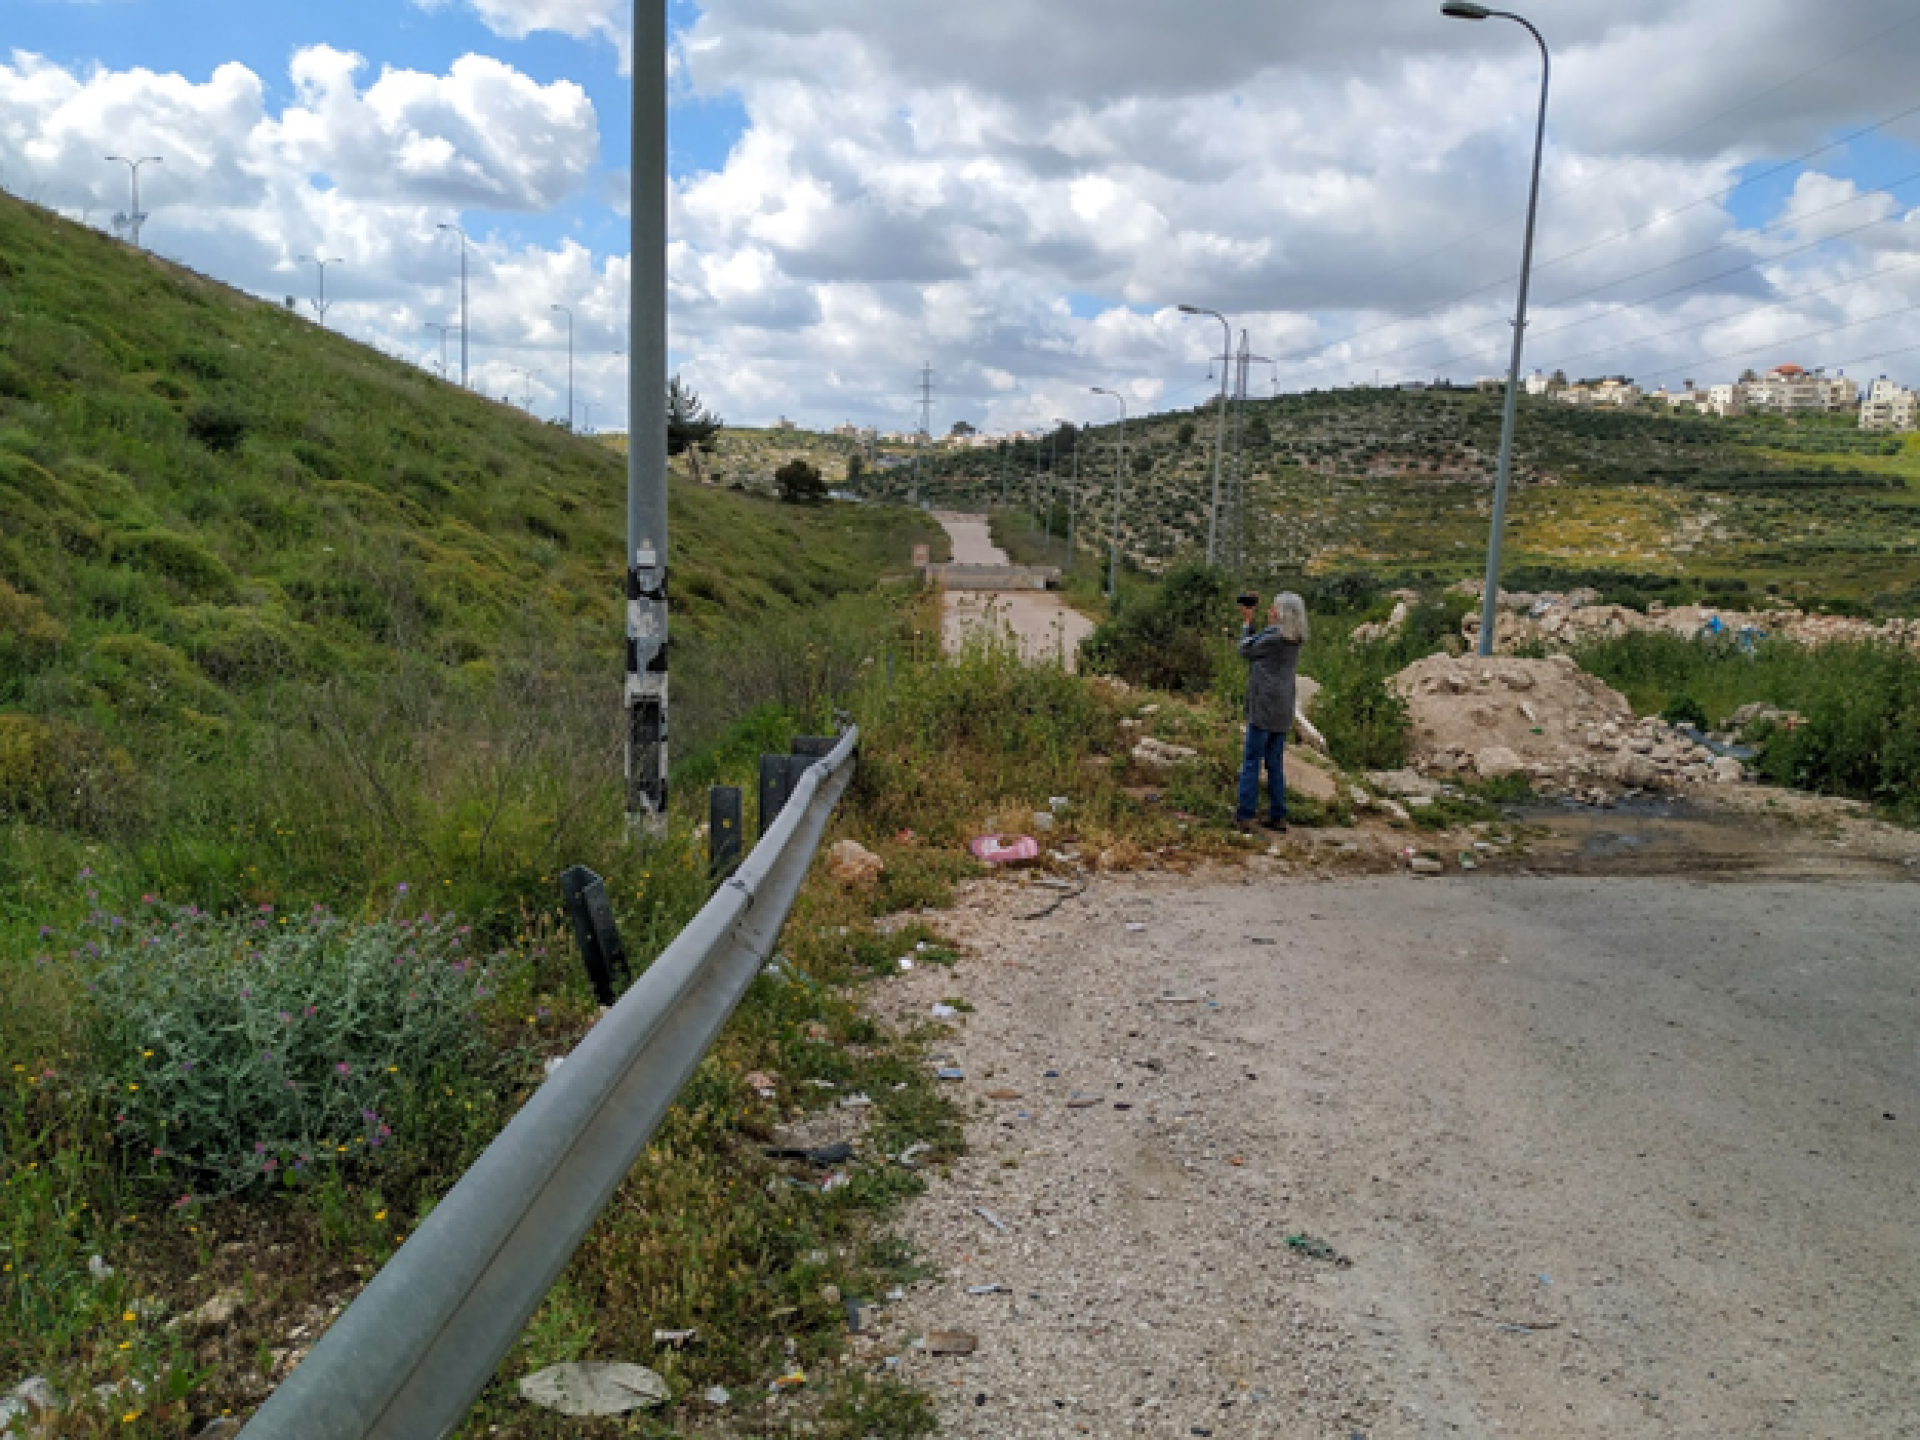 The barrier at the entrance to Beit Likiya village. Road 443 beyond the ‘security fence’ was paved on the Palestinians’ lands and is out of bounds for them